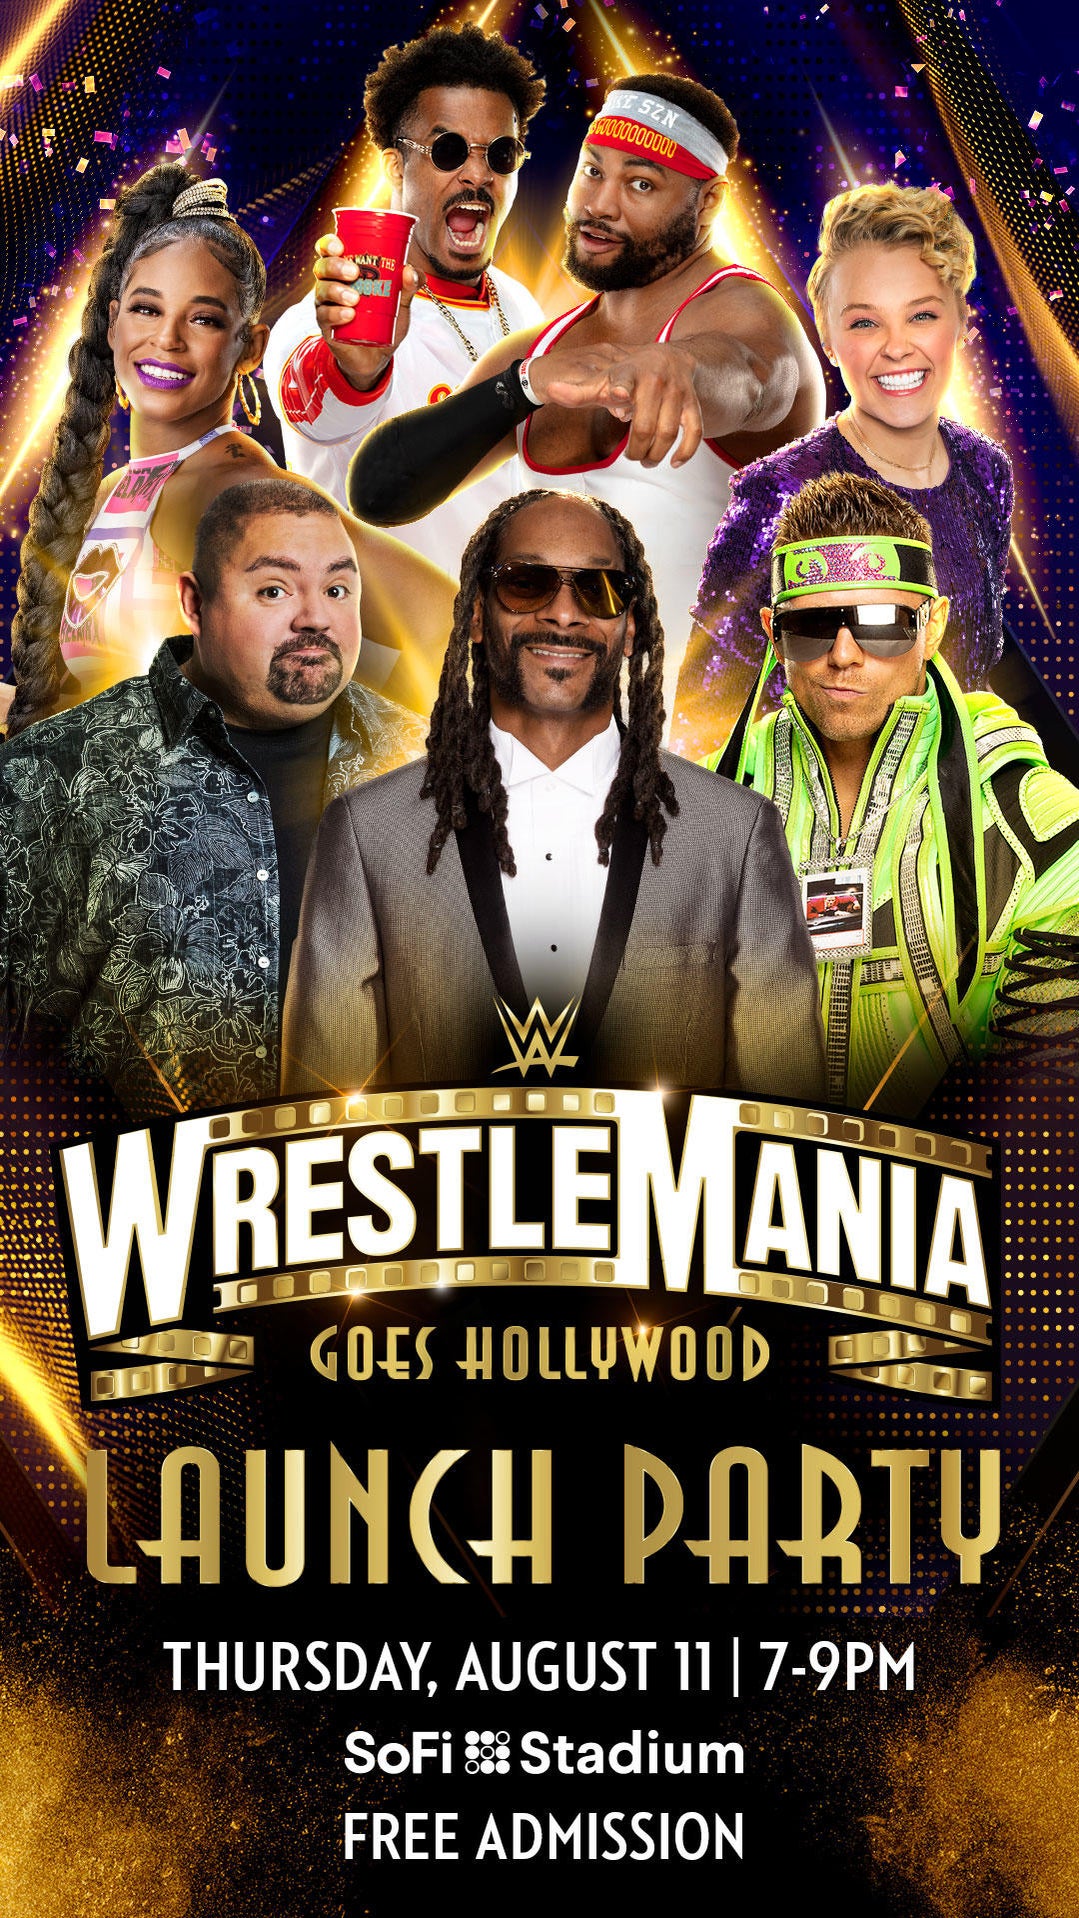 WrestleMania 39: All You Need To Know About This Year's WWE